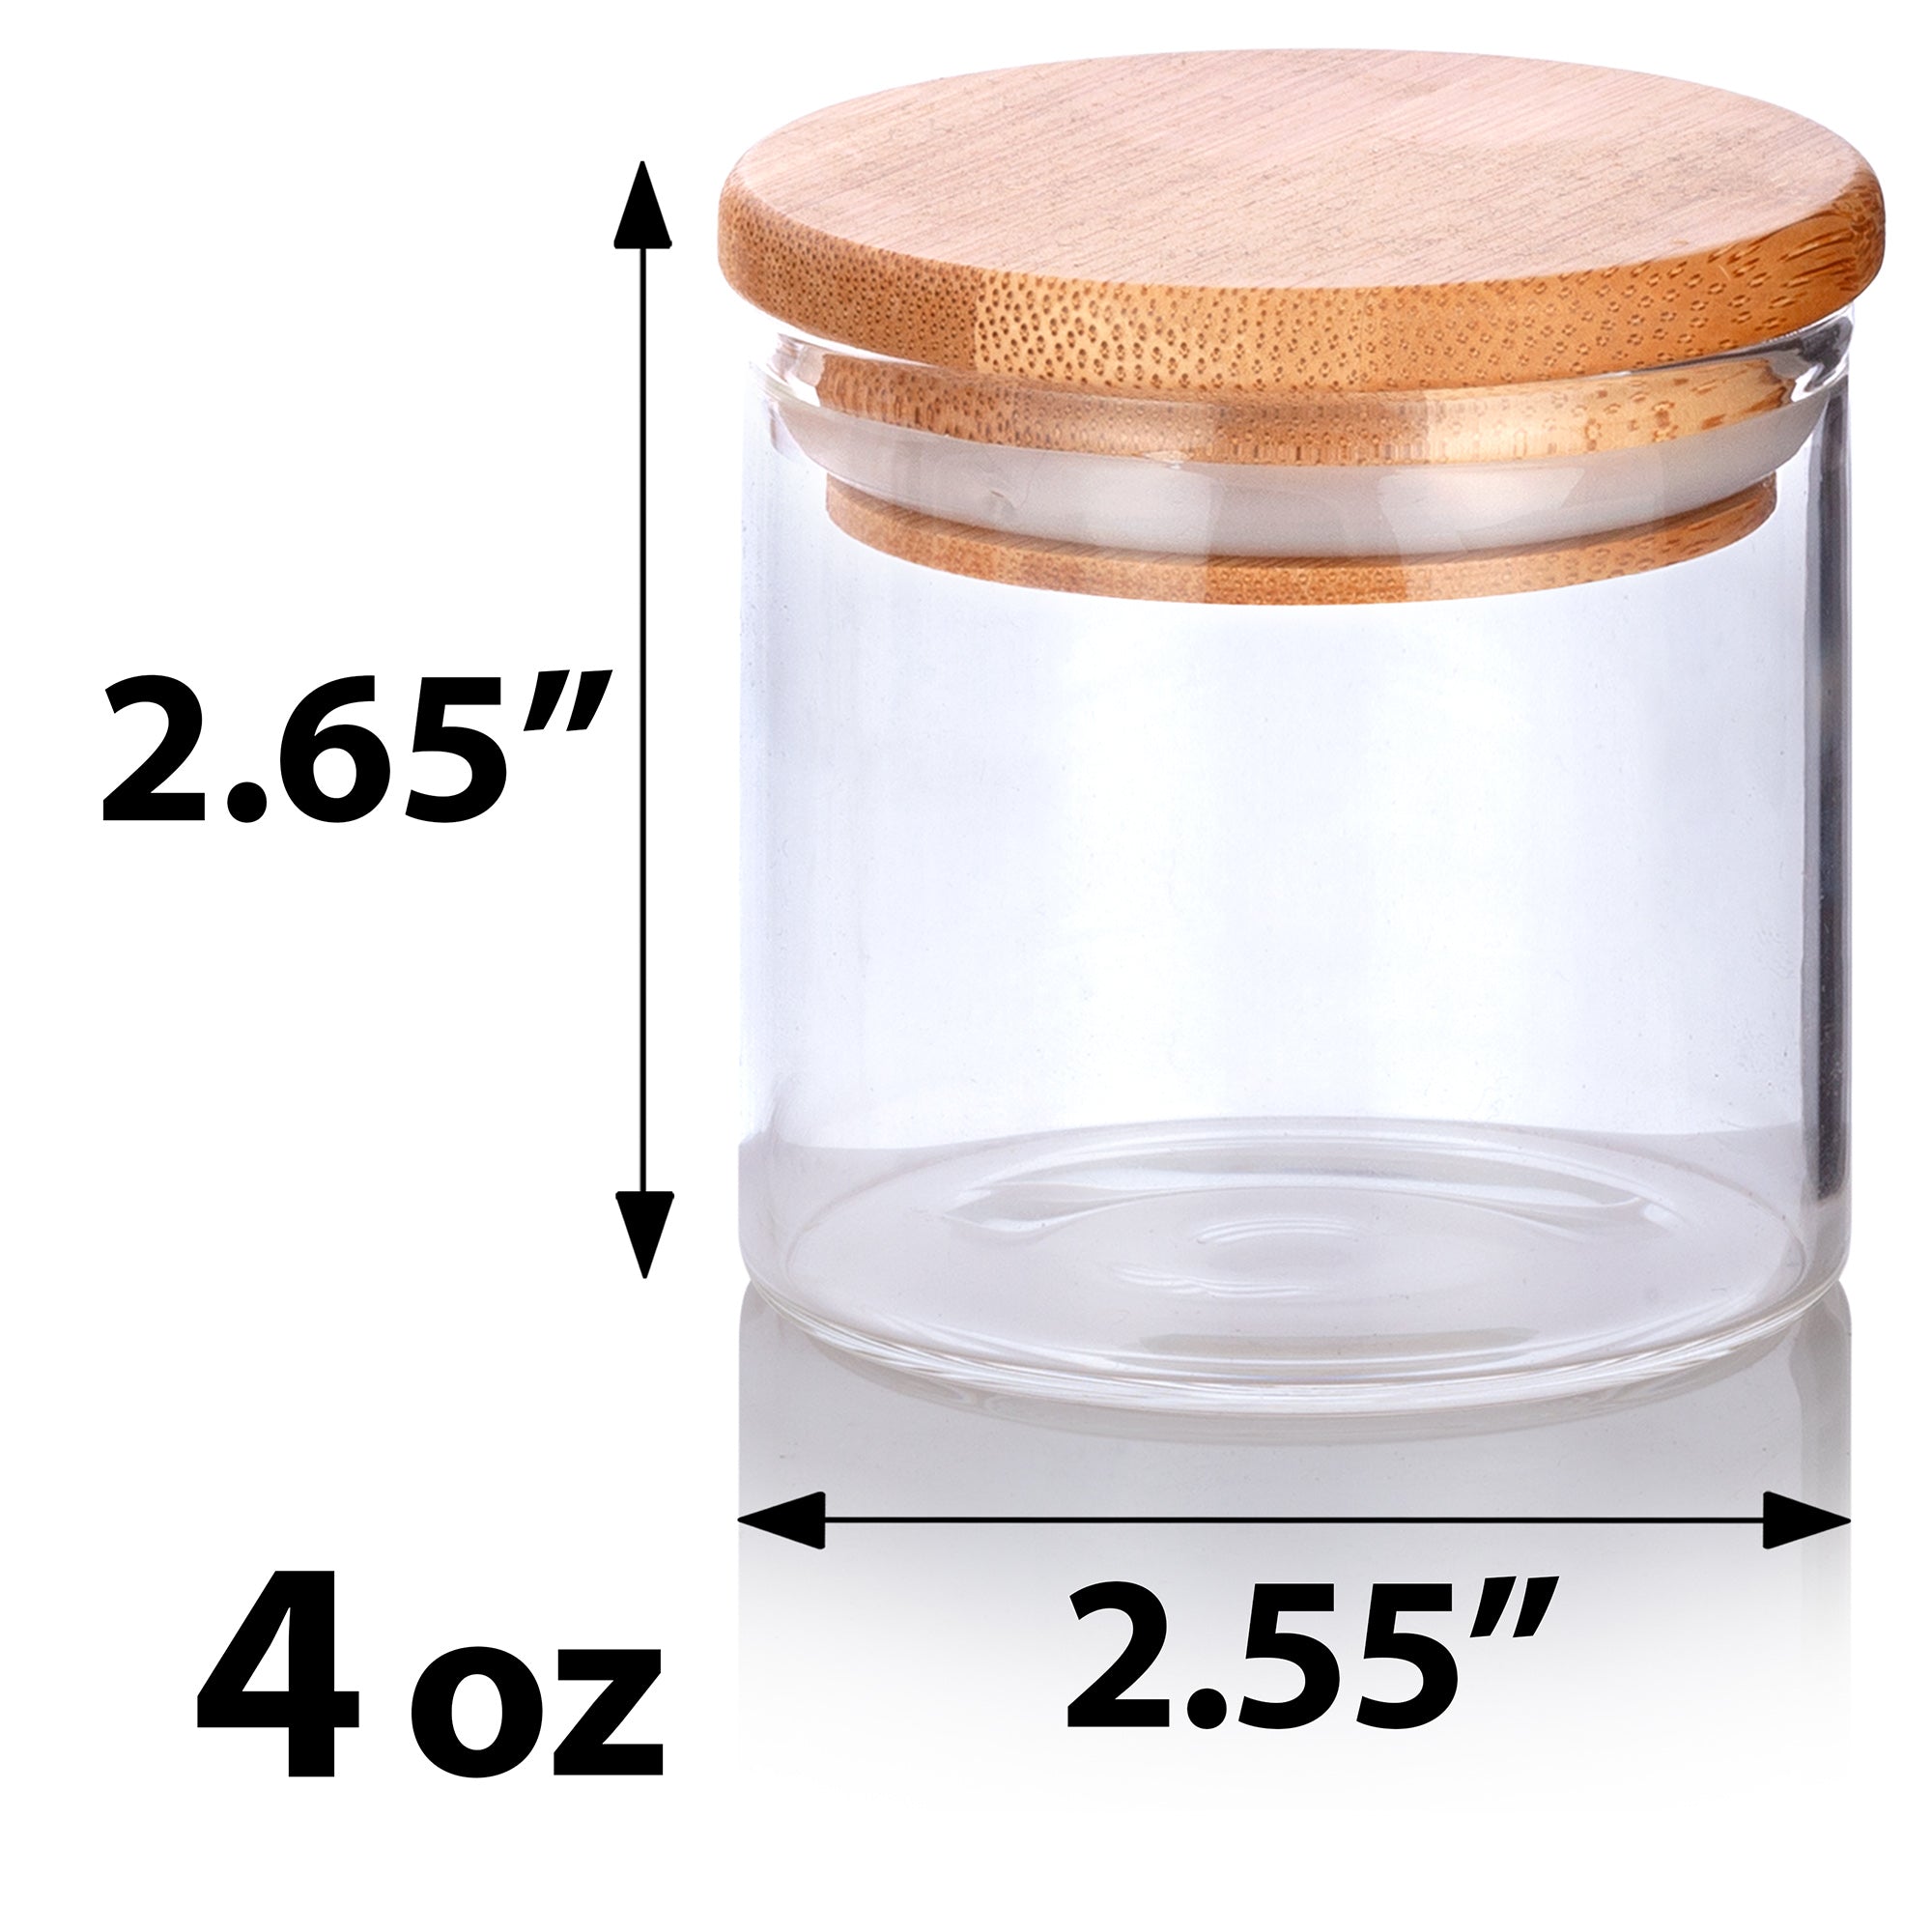 JUVITUS 2 oz Premium Borosilicate Clear Glass Jars with Bamboo Silicone Sealed Lid (12 Pack)